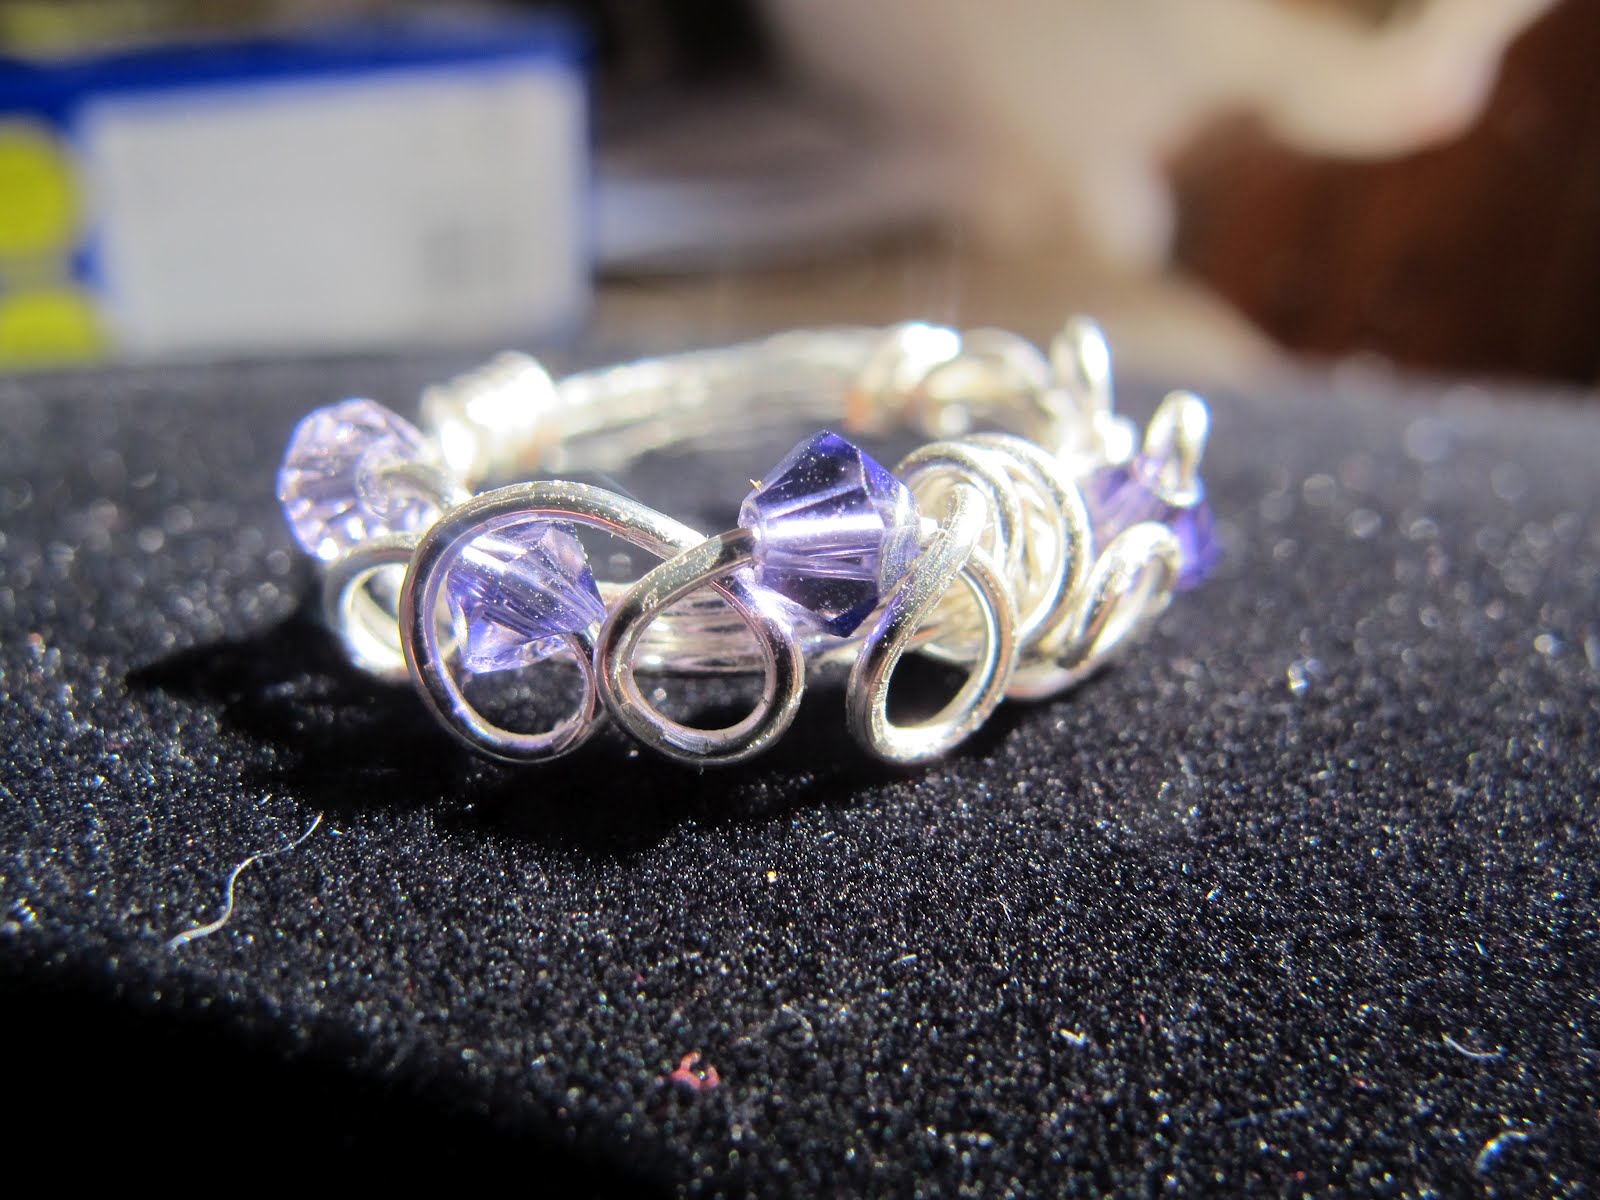 Naomi's Designs: Handmade Wire Jewelry: Silver wire wrapped rings with  Swarovski crystals